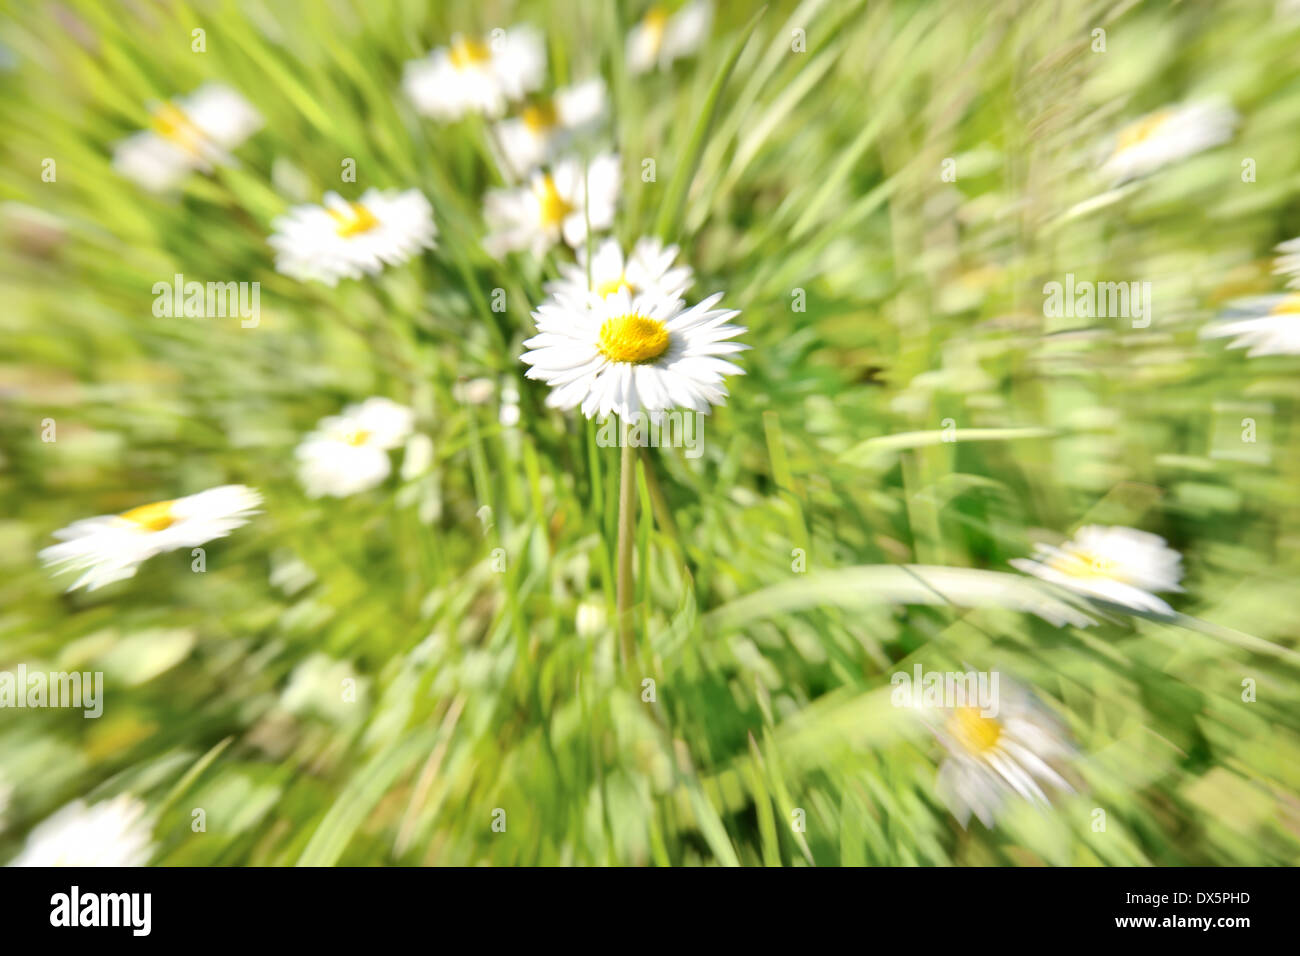 daisy in a lawn Stock Photo